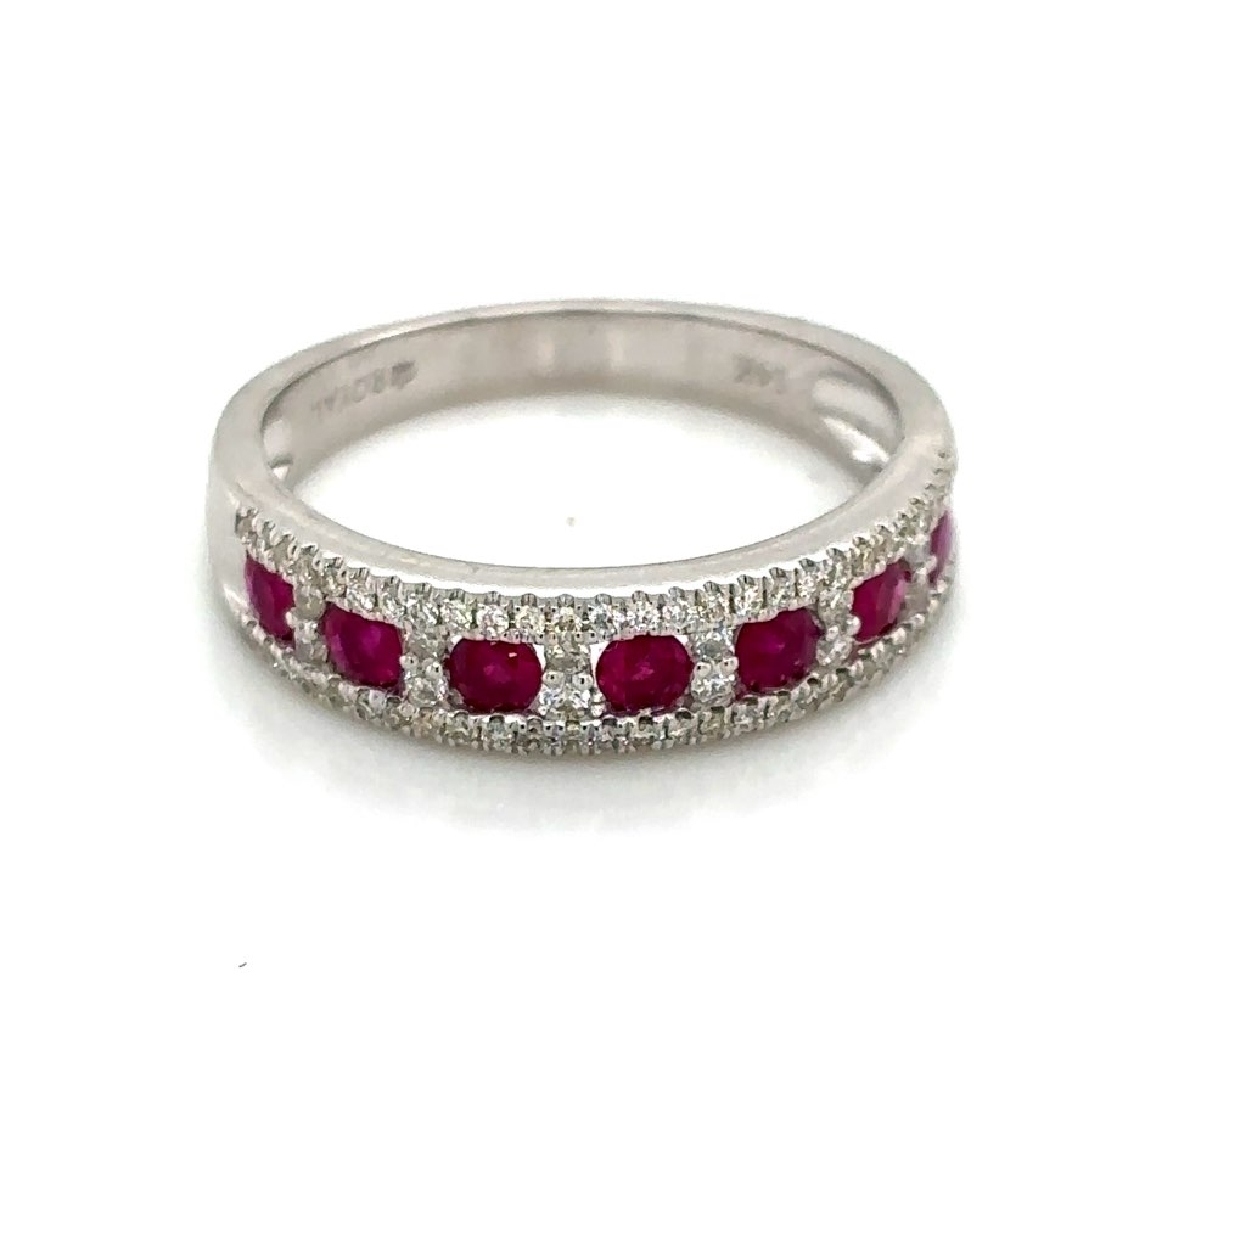 14K White Gold Ring with Round Rubies .60CT and .26CT Diamond Halo 

Size 7